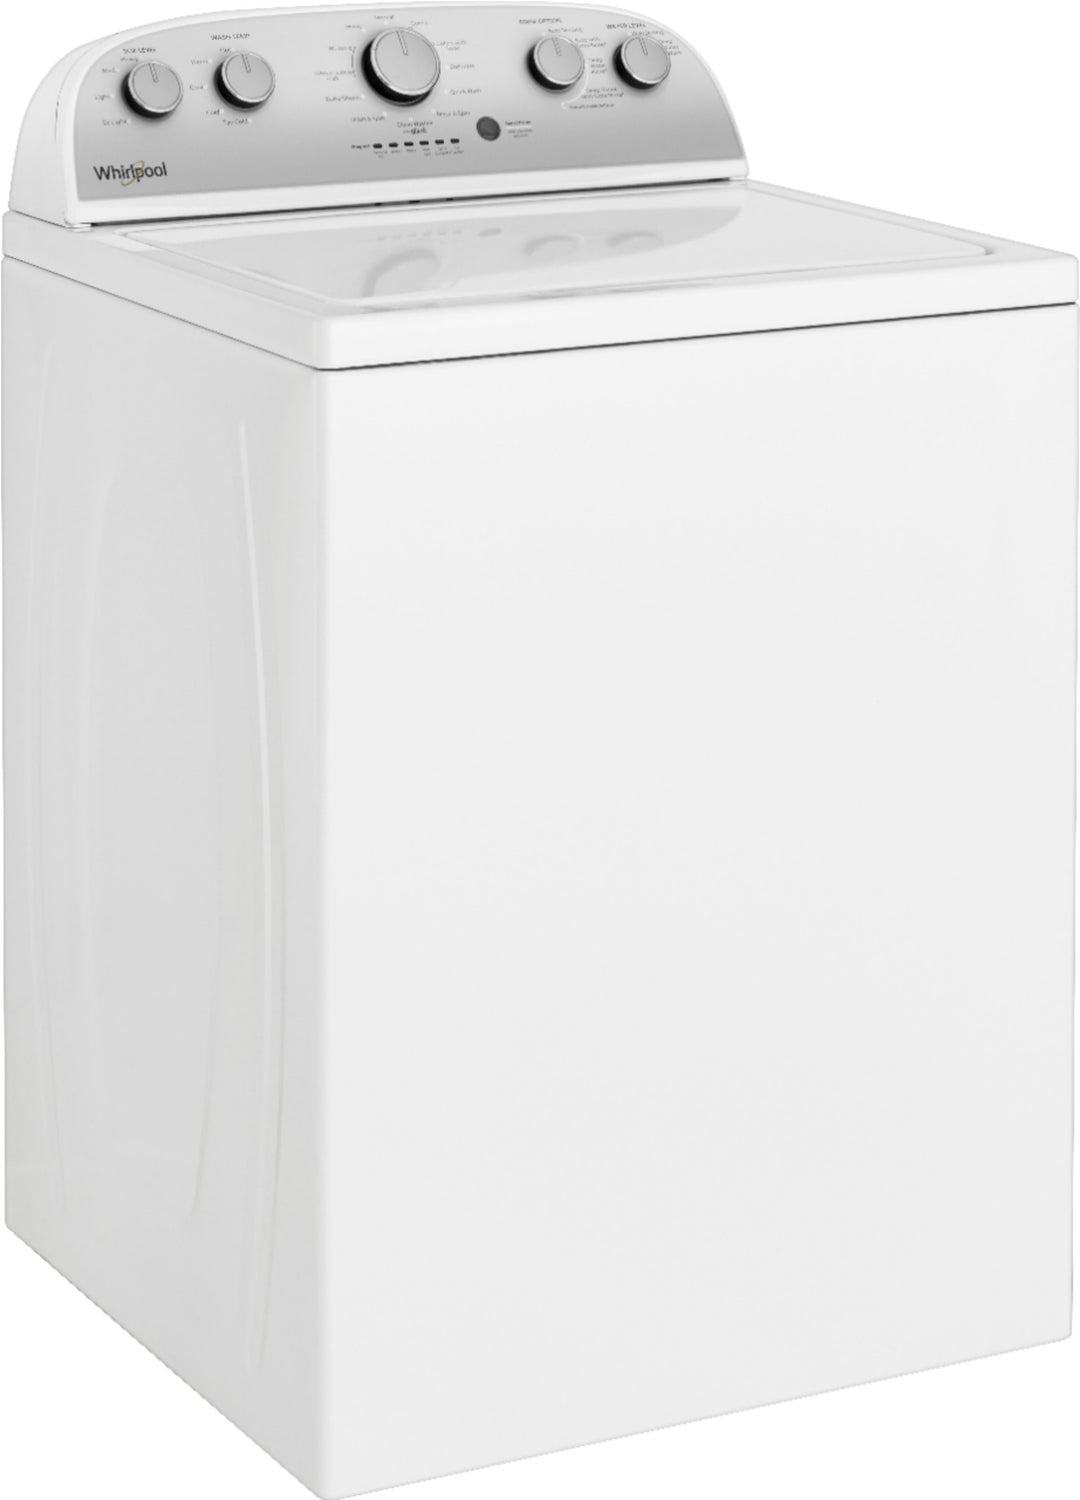 Whirlpool - 3.8 Cu. Ft. High Efficiency Top Load Washer with 360 Wash Agitator - White_1